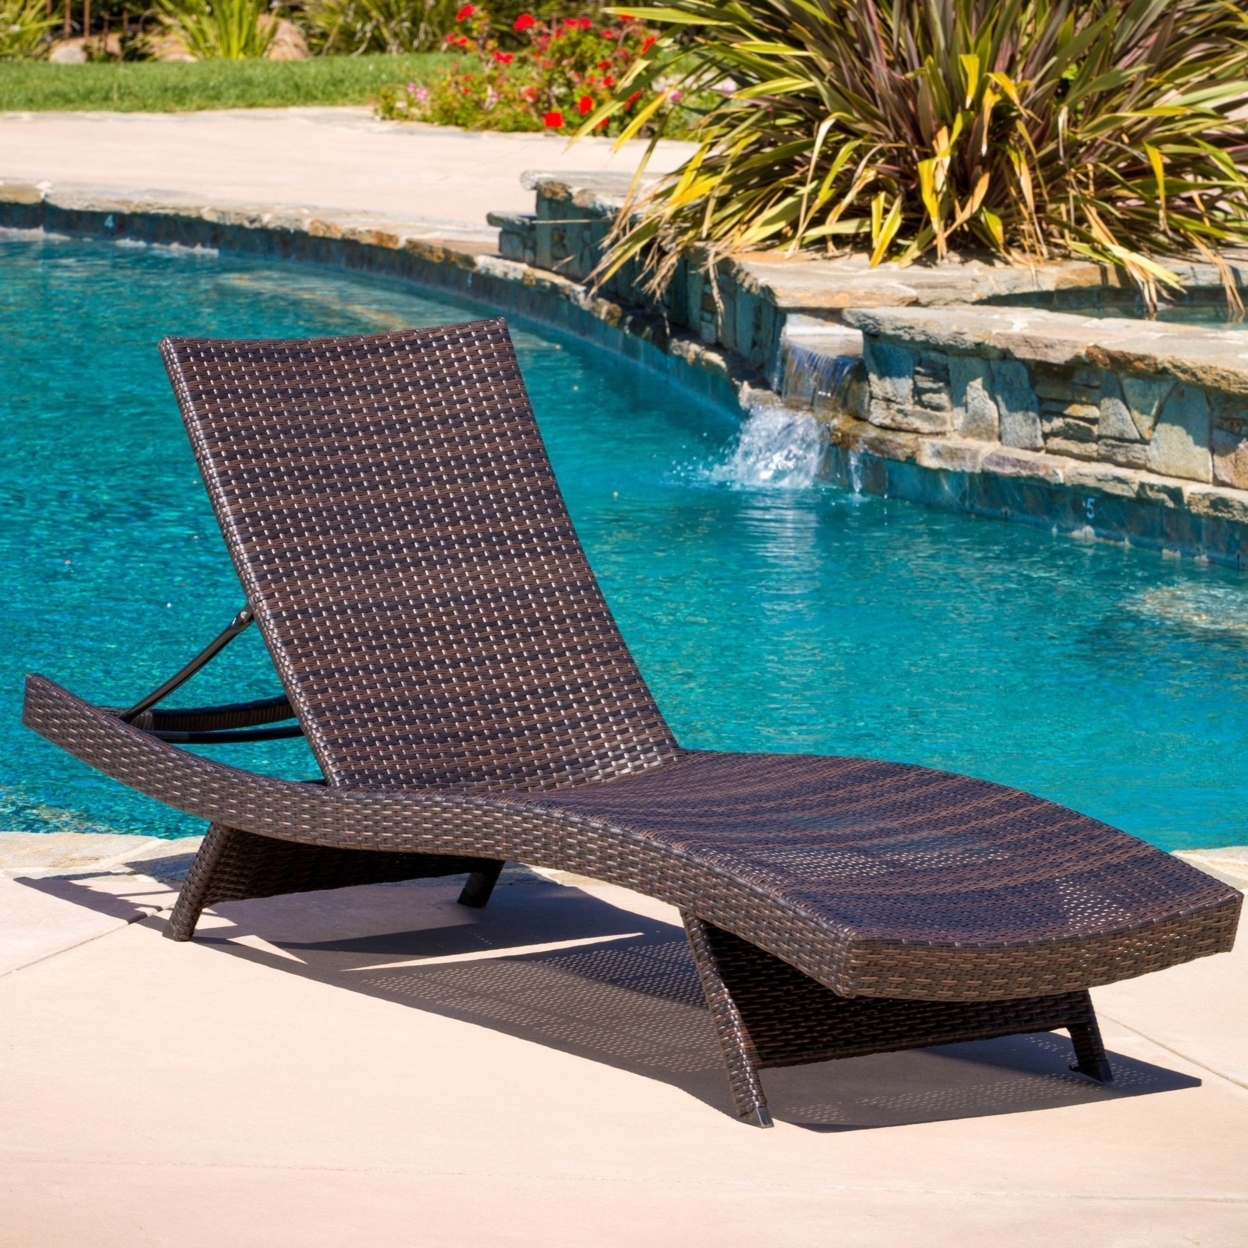 Lakeport 5p Outdoor Adjustable Chaise Lounge Set